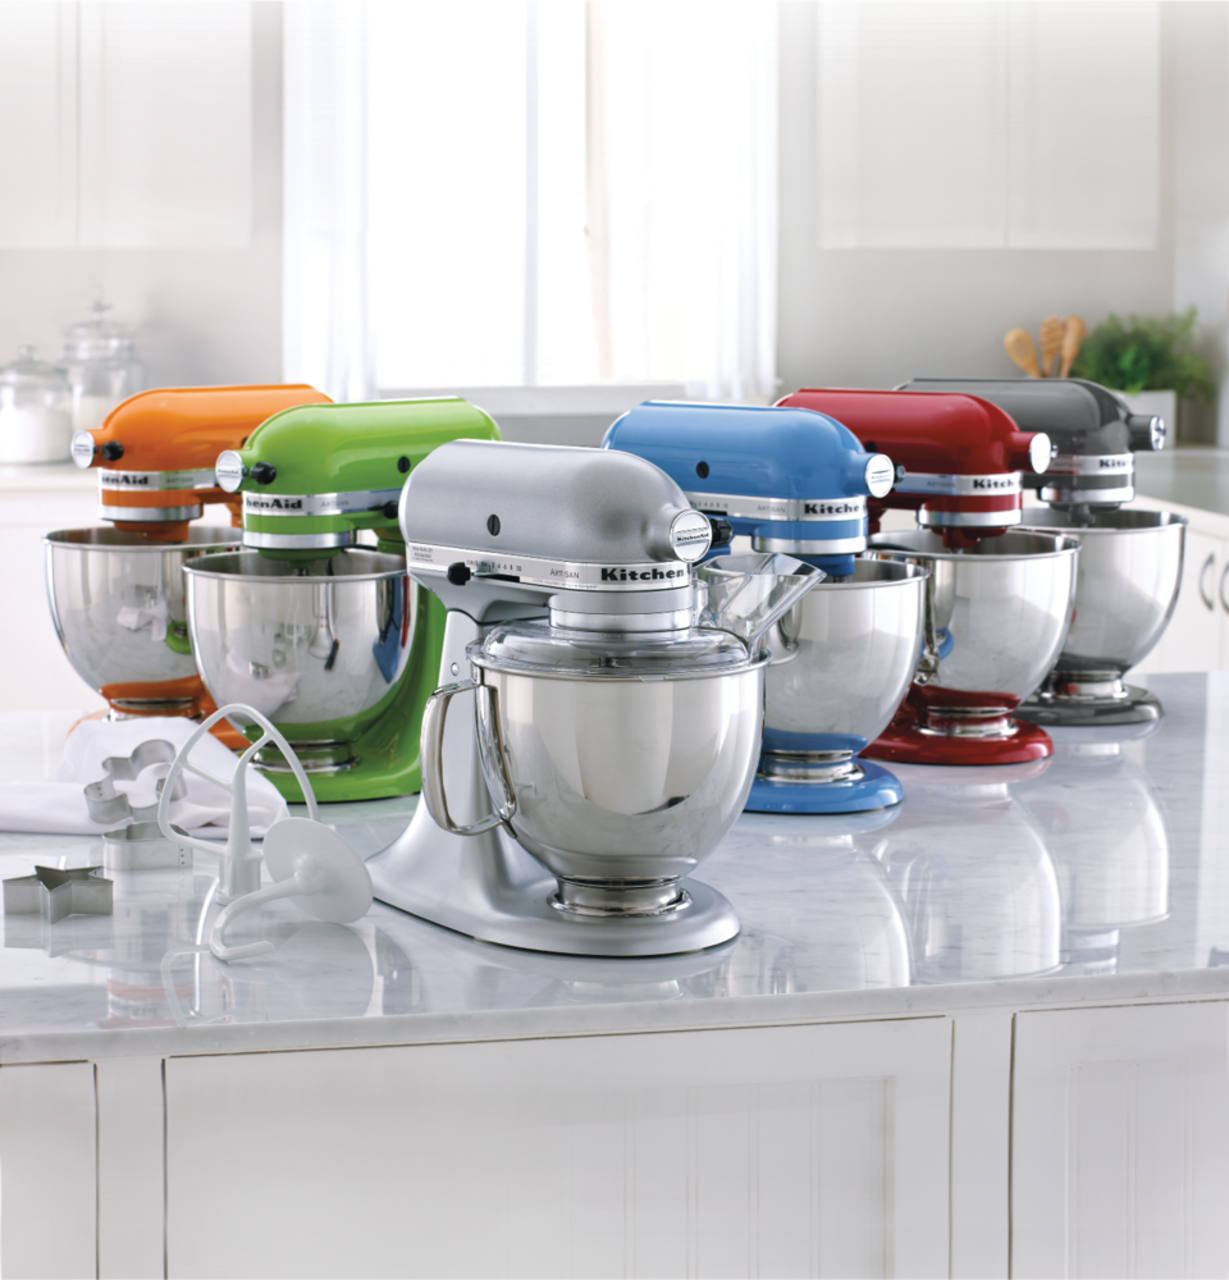 https://media-www.canadiantire.ca/product/living/kitchen/kitchen-appliances/0431406/artisan-stand-mixer-empire-red-bd7dd790-a4e2-462c-8734-6baab2235ce0.png?imdensity=1&imwidth=1244&impolicy=mZoom